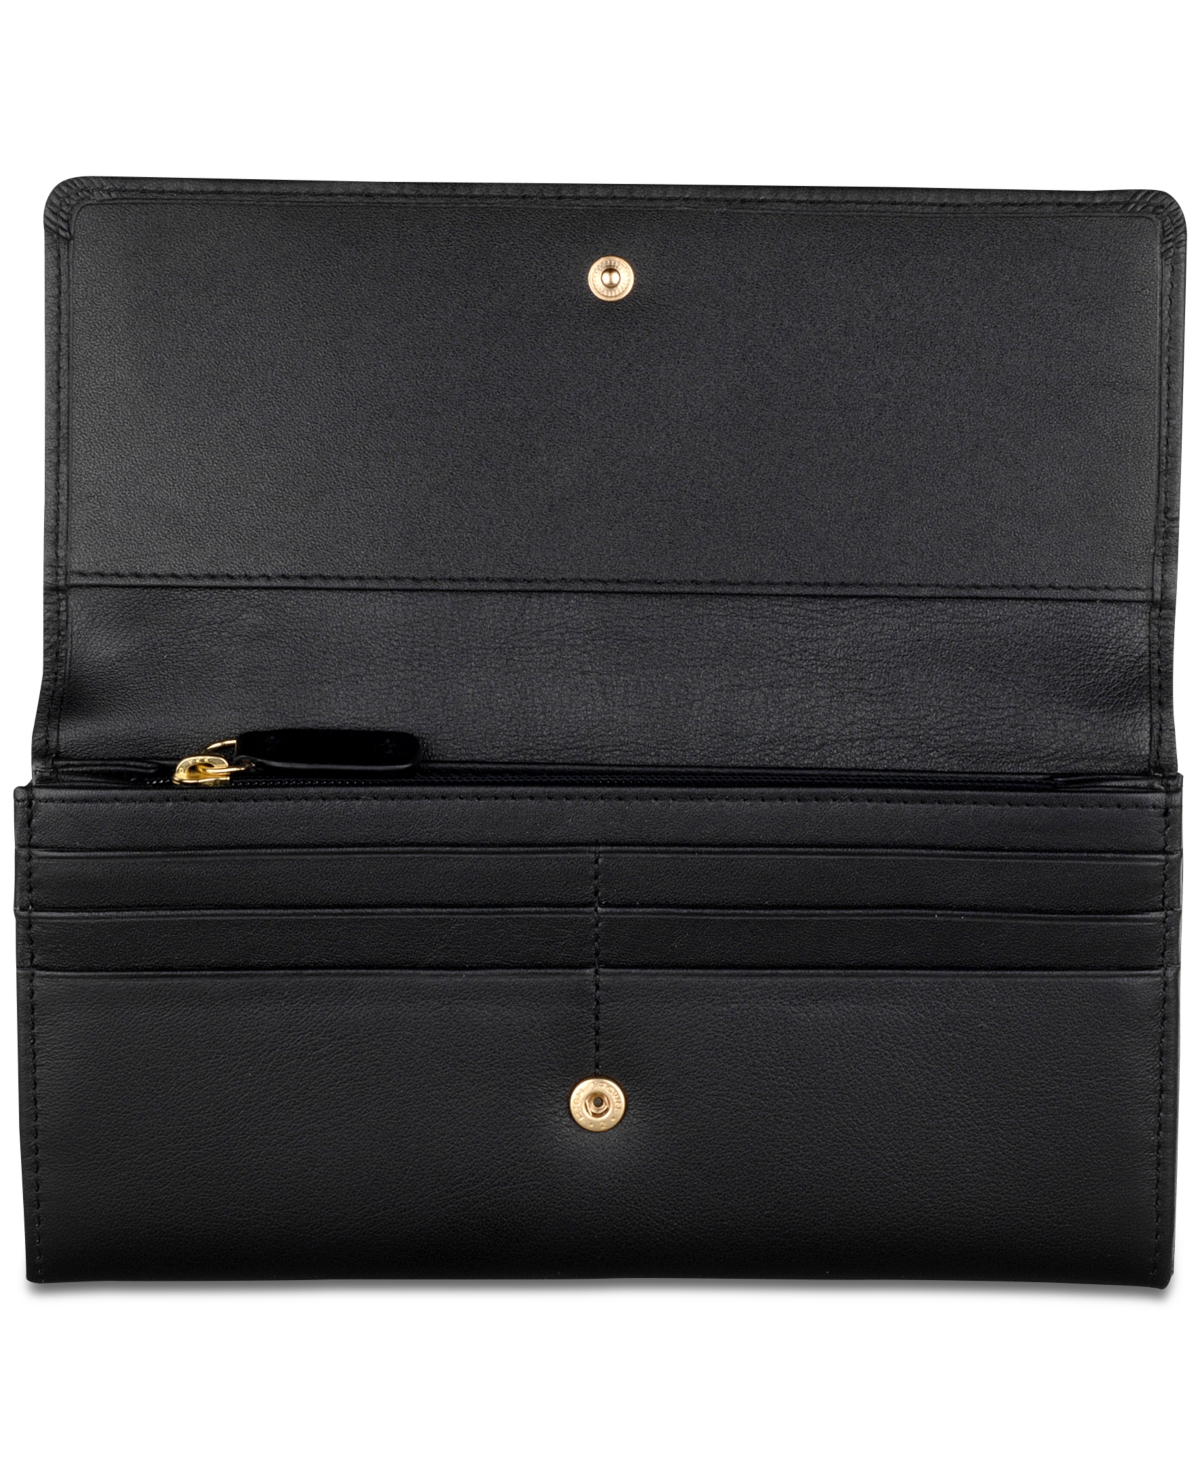 Shop Radley London Large Flapover Leather Wallet In Black,gold